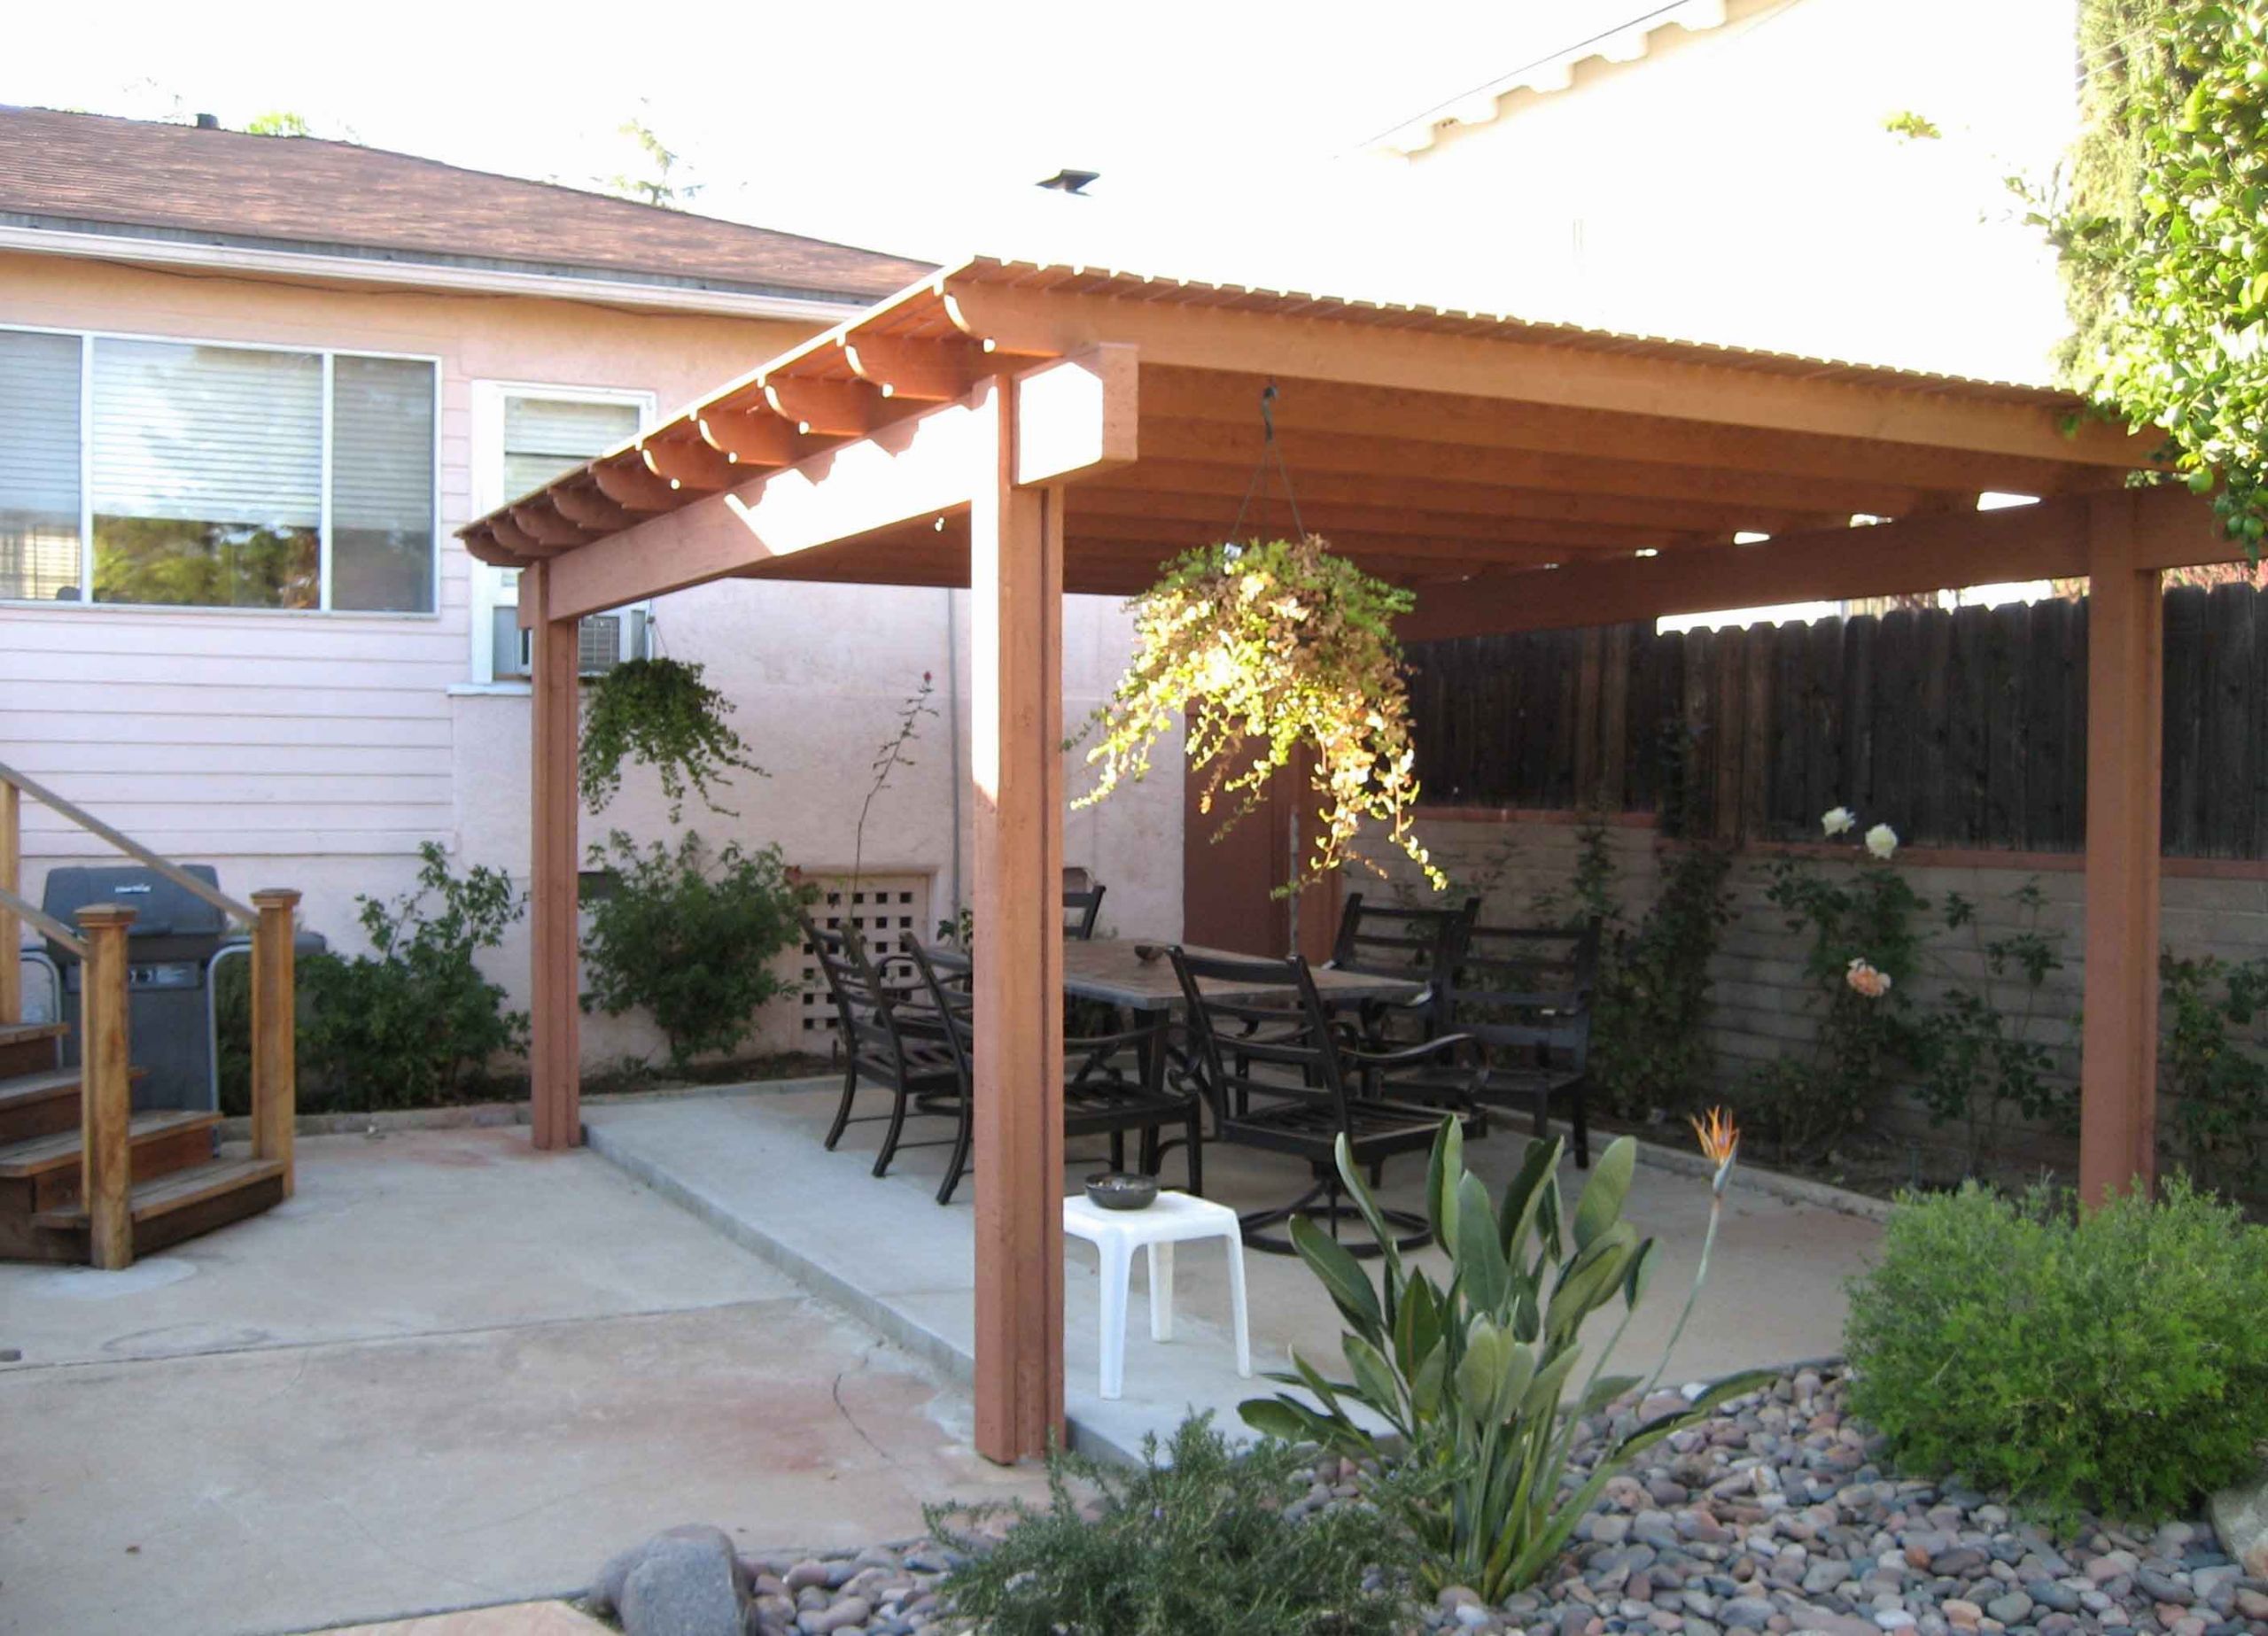 DIY Outdoor Covered Patio
 How to Build A Freestanding Patio Cover with Best 10